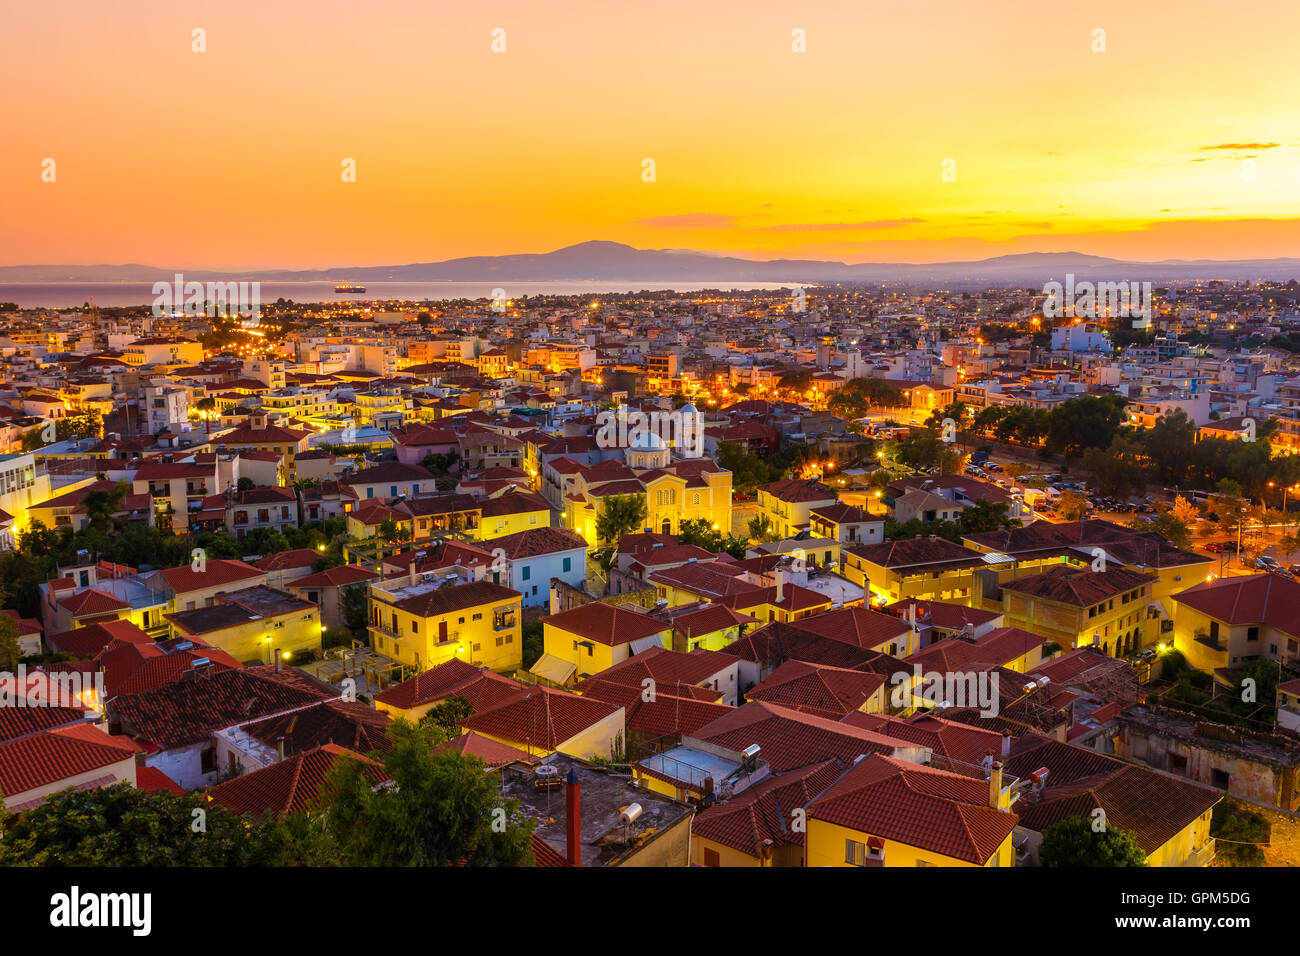 Kalamata city skyline in the evening after sunset with city lights in the foreground Stock Photo